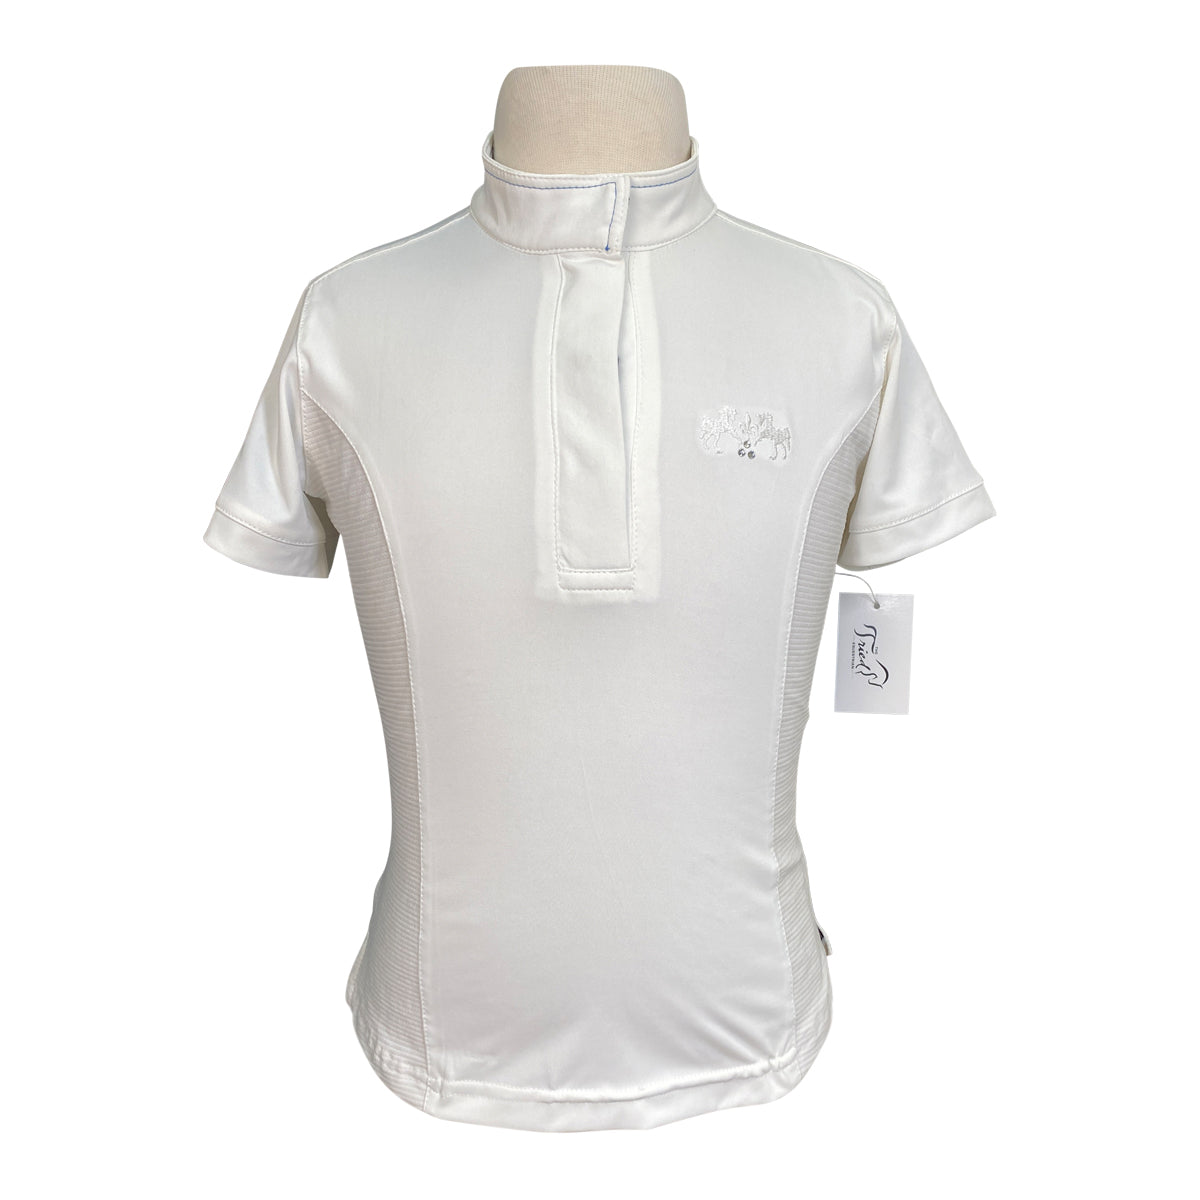 Equine Couture 'Cara' Short Sleeve Show Shirt in White